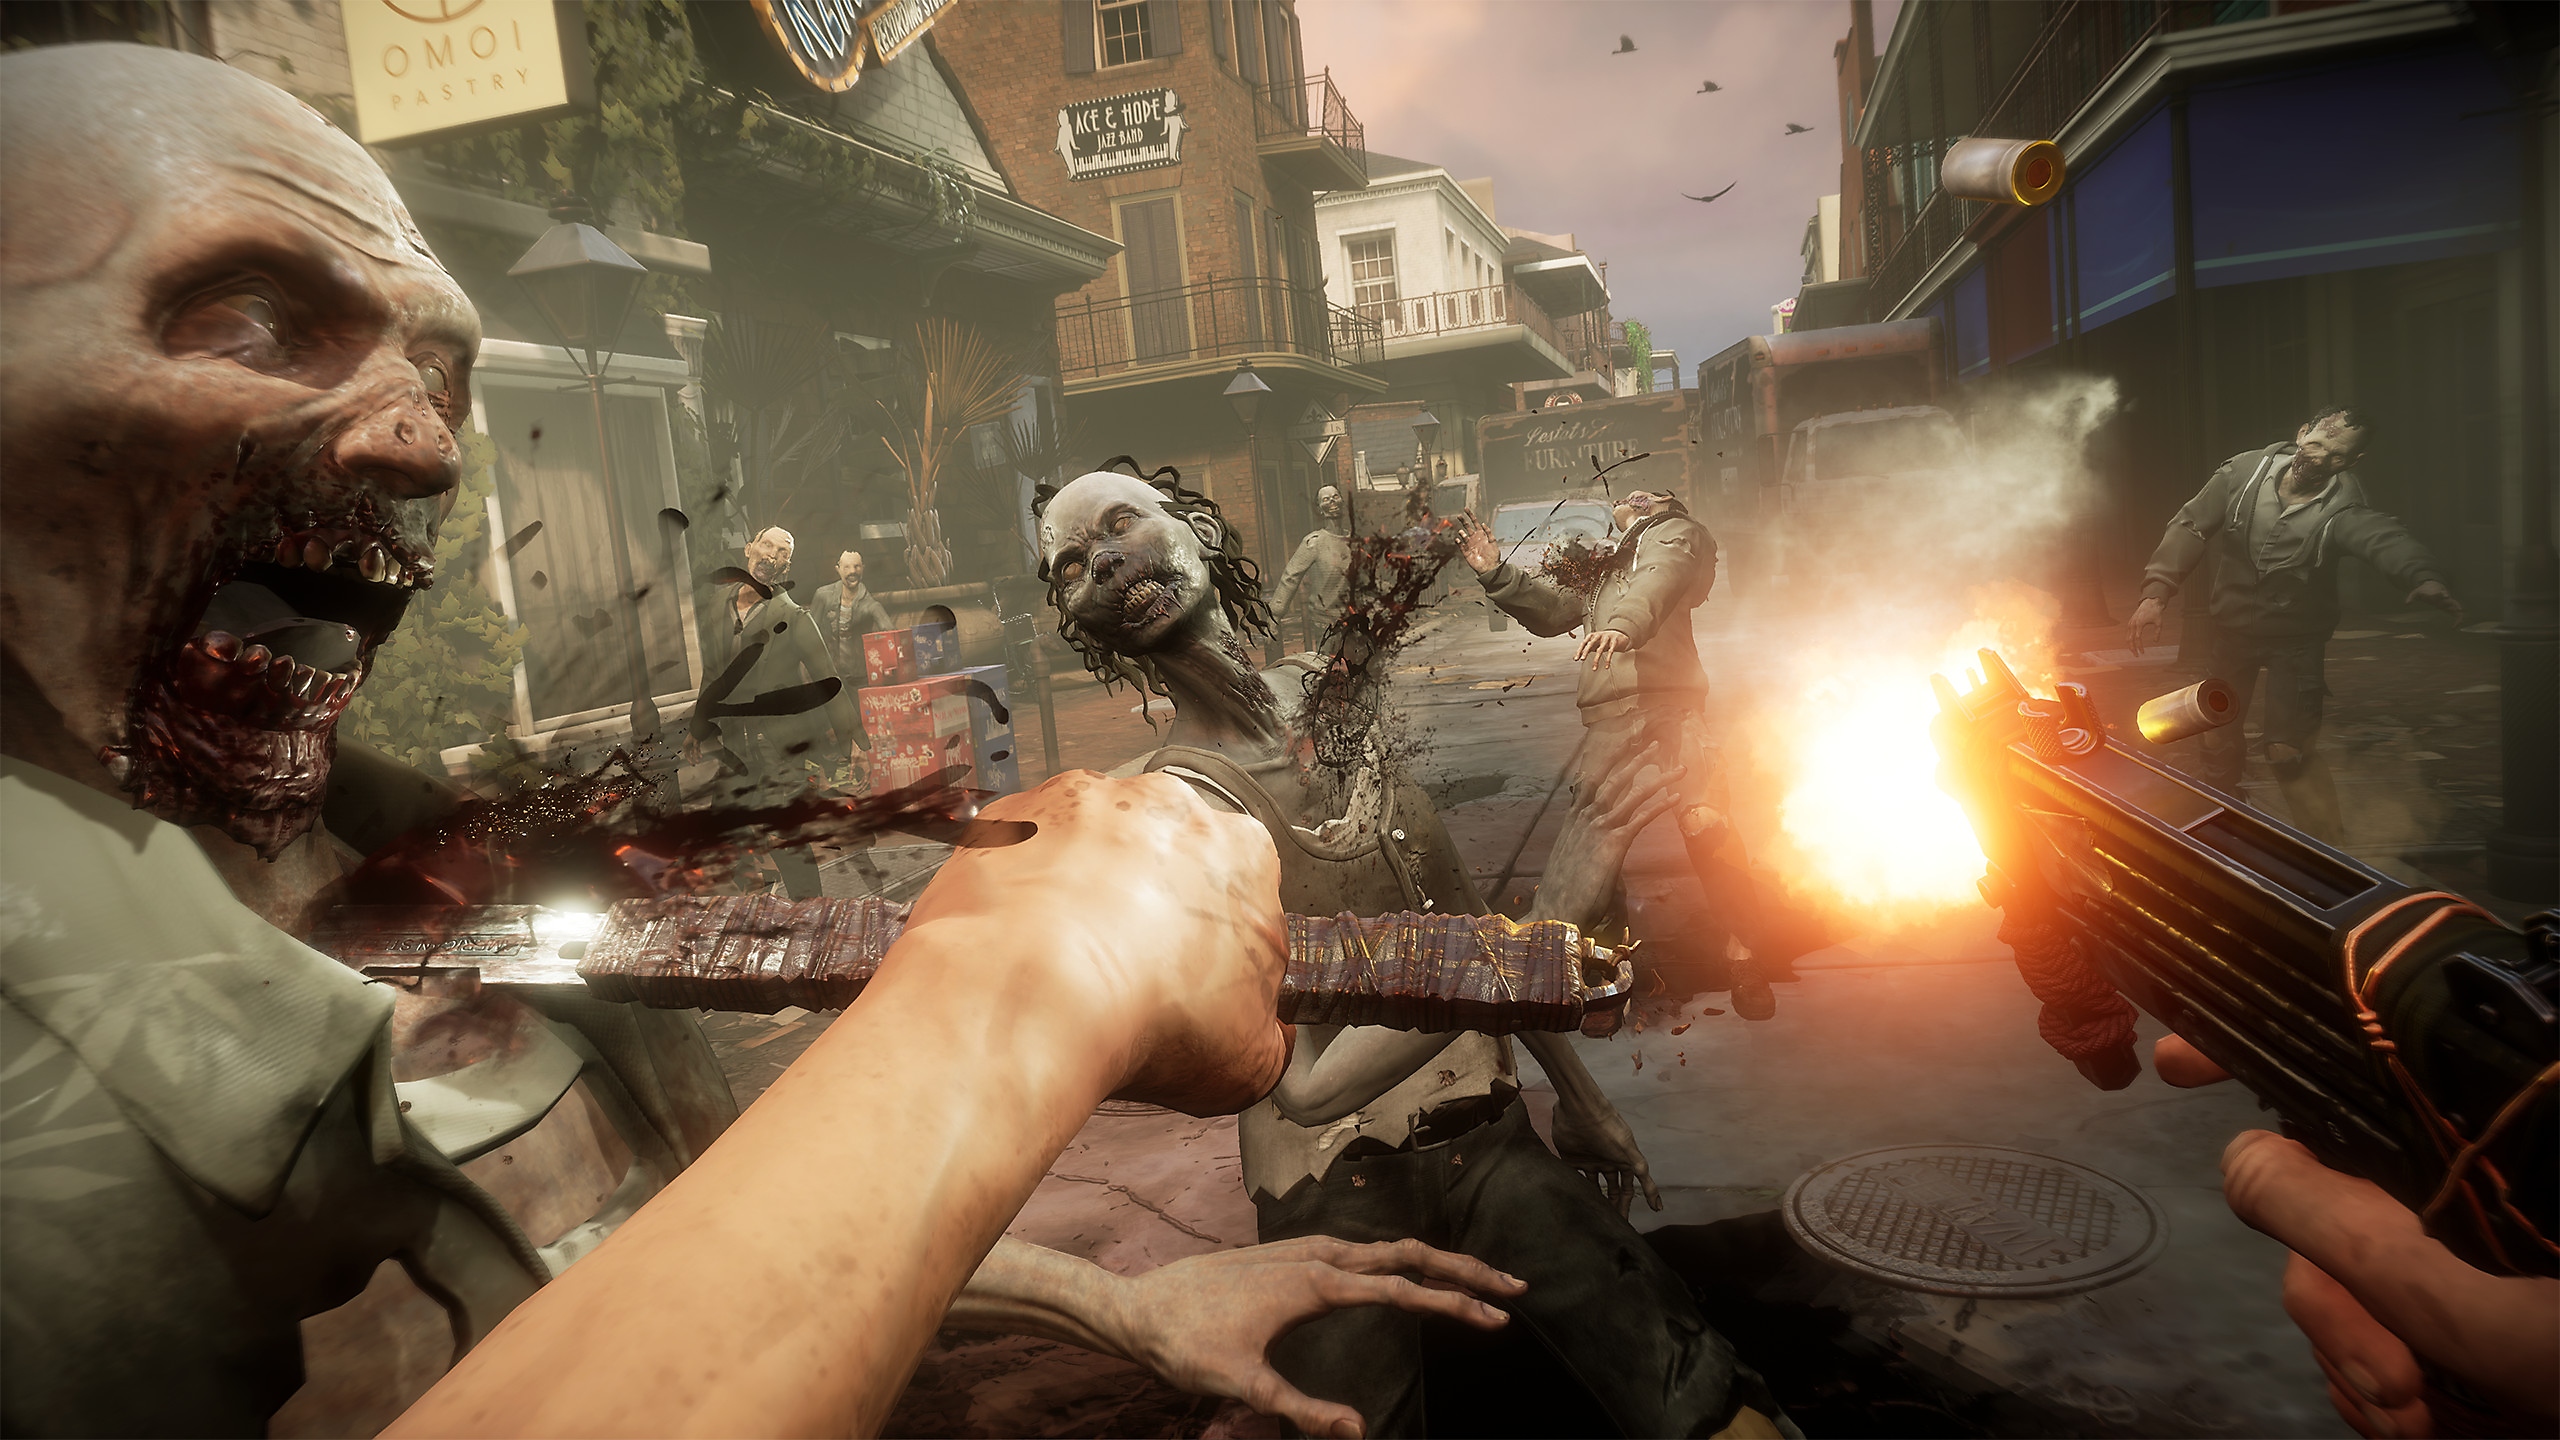 TWDSS Chapter 2 Retribution screenshot showing a first person view attacking zombies with dual-wielding a knife and gun